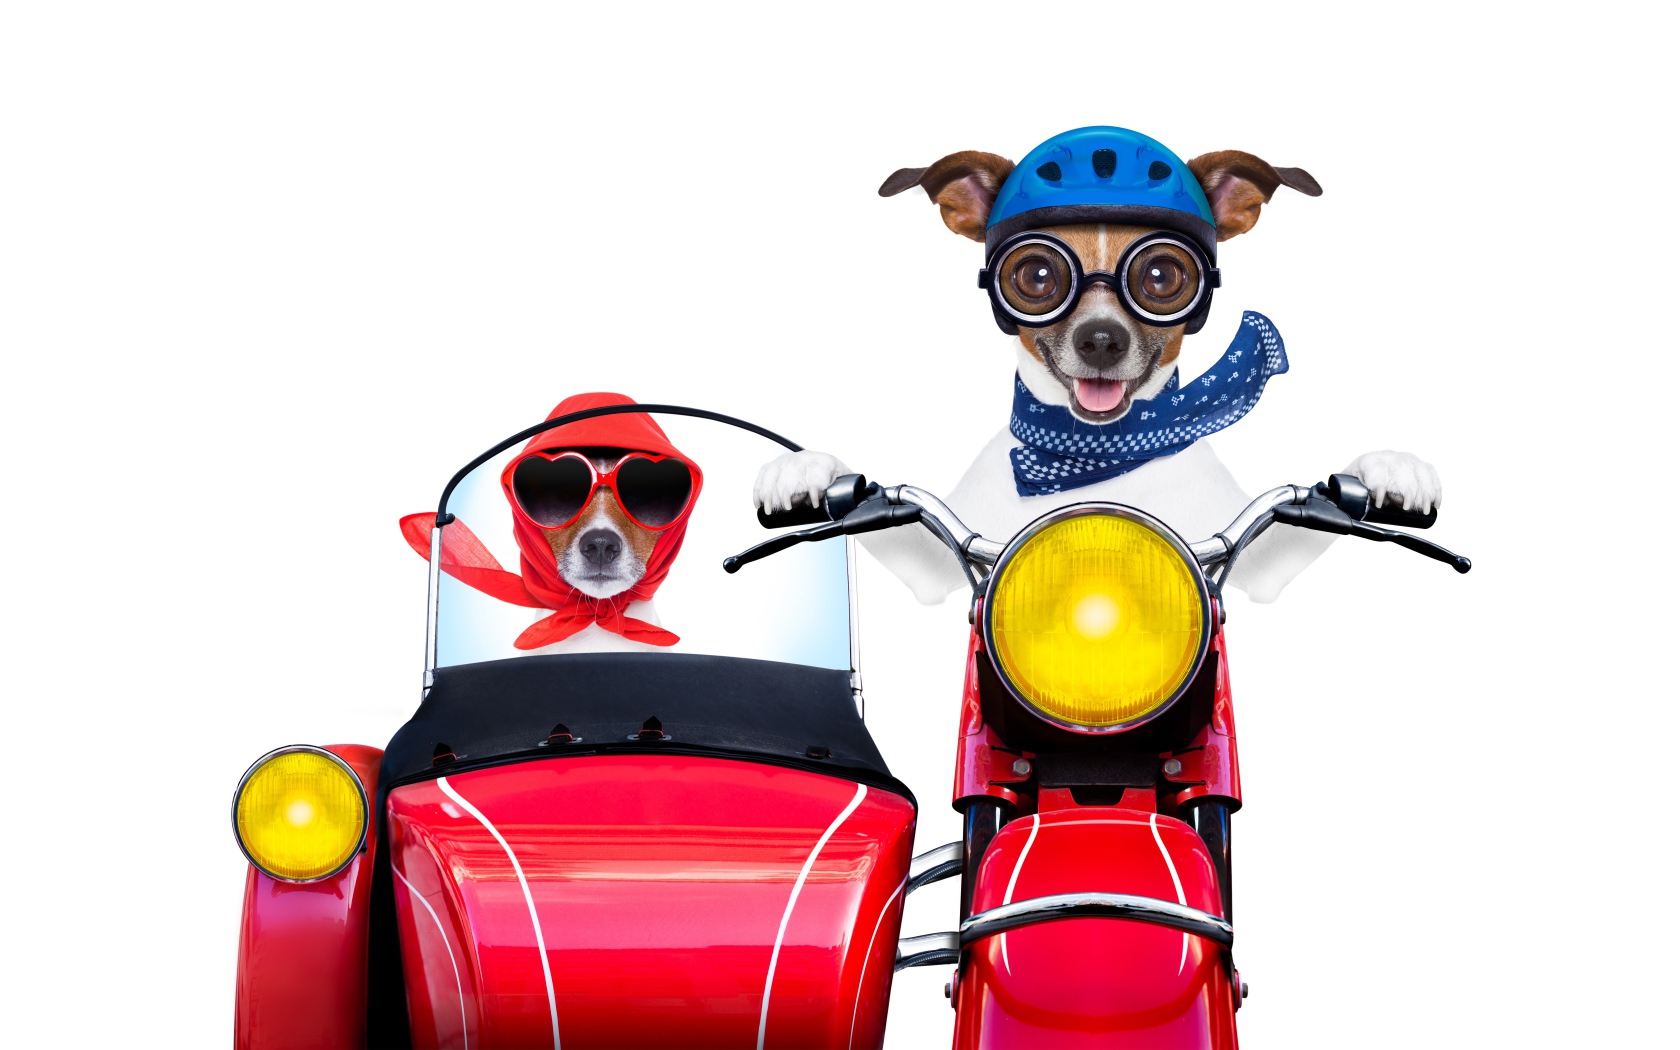 Two funny dogs on a motorcycle on a white background